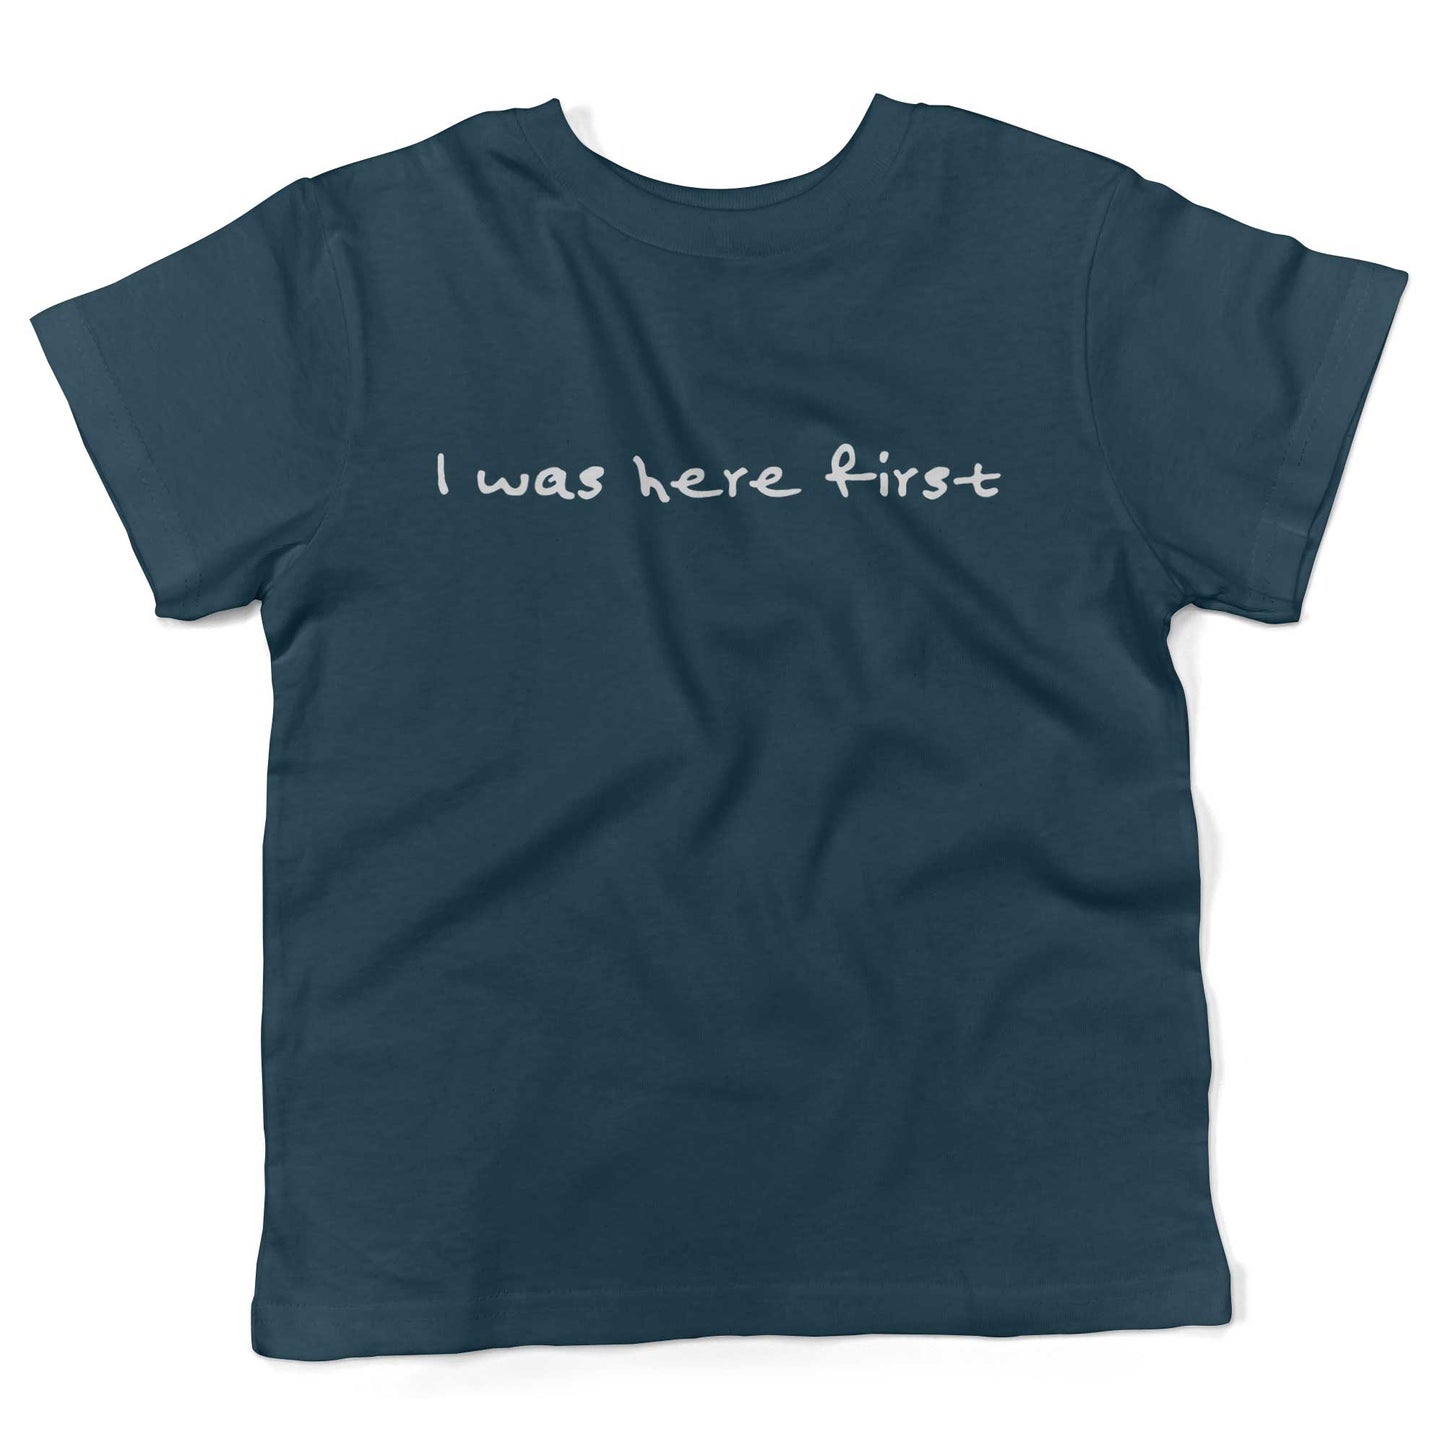 I Was Here First Toddler Shirt-Organic Pacific Blue-2T